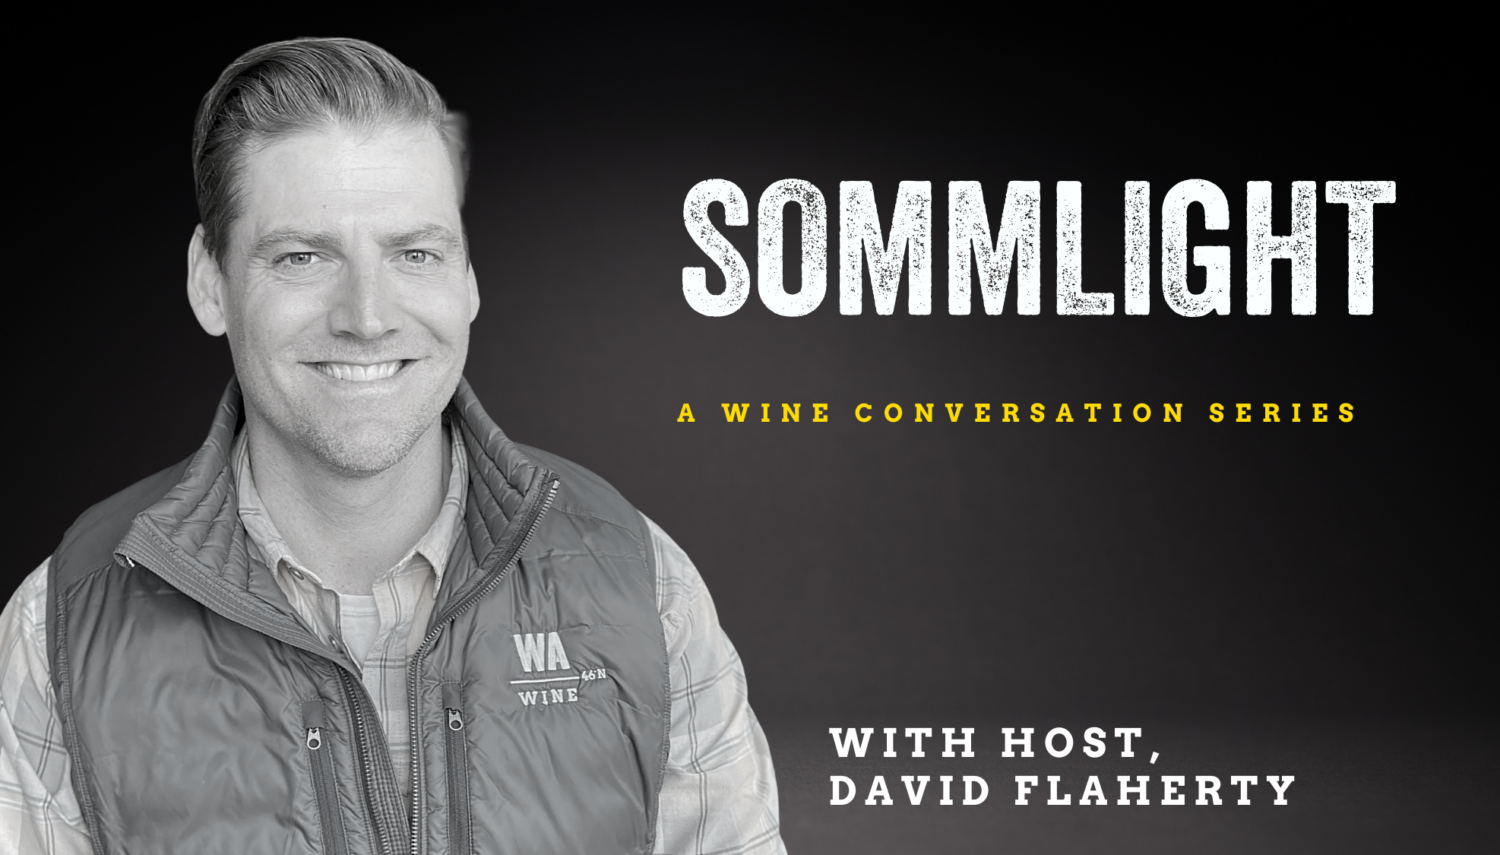 black and white image of a man wearing a button up shirt and vest, smiling at the camera. "Sommlight A Wine Conversation with Host, David Flaherty" is over the dark background.